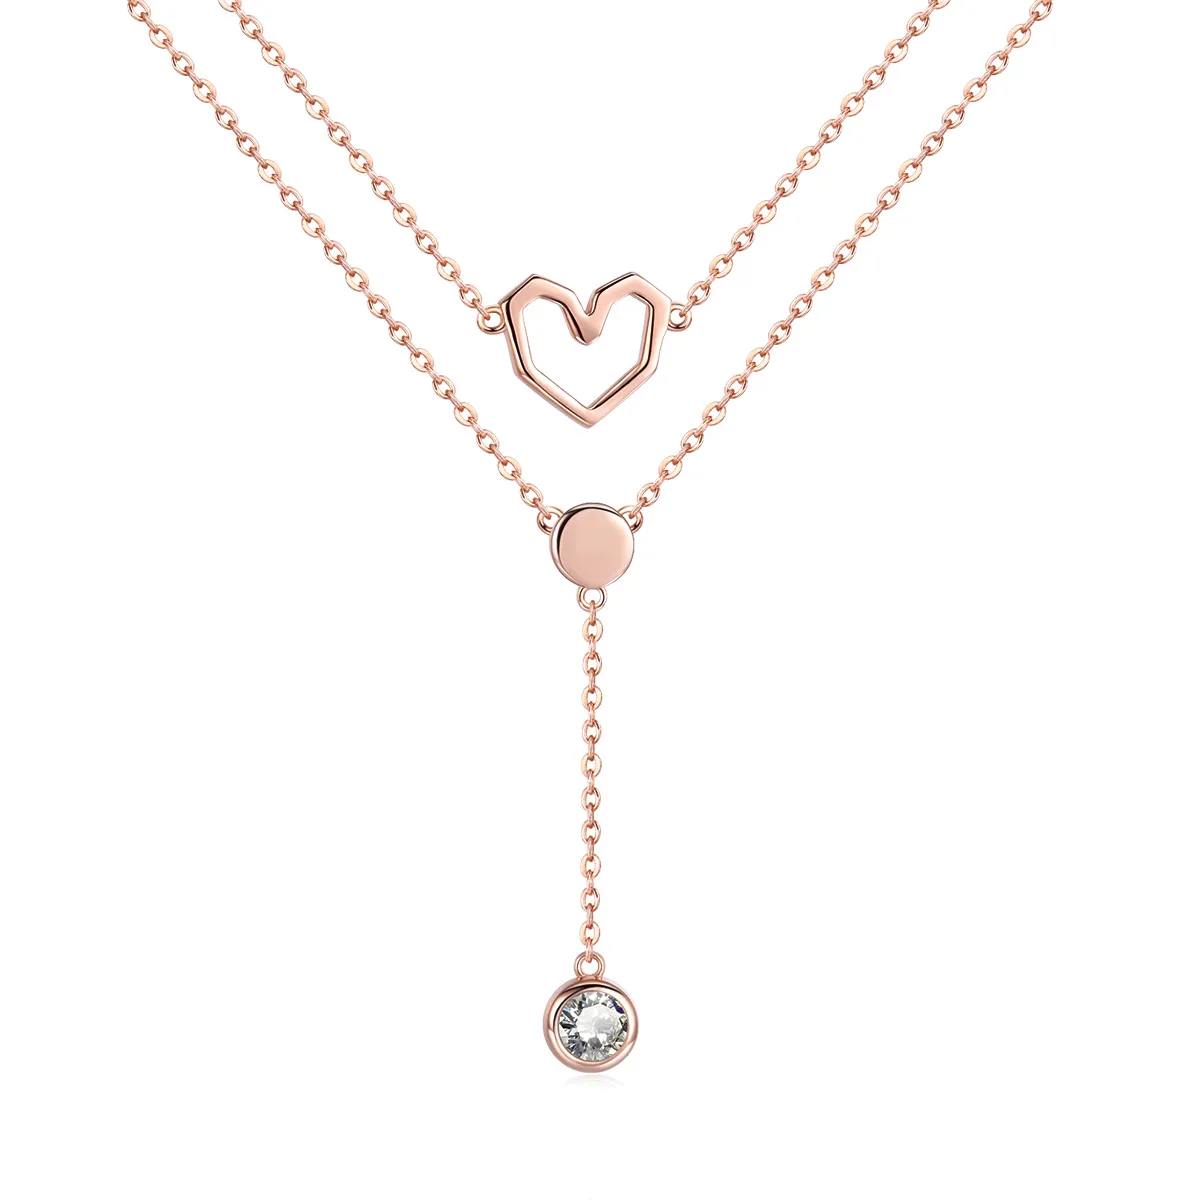 Pandora Style Silver Land of Heart Necklace - SCN317